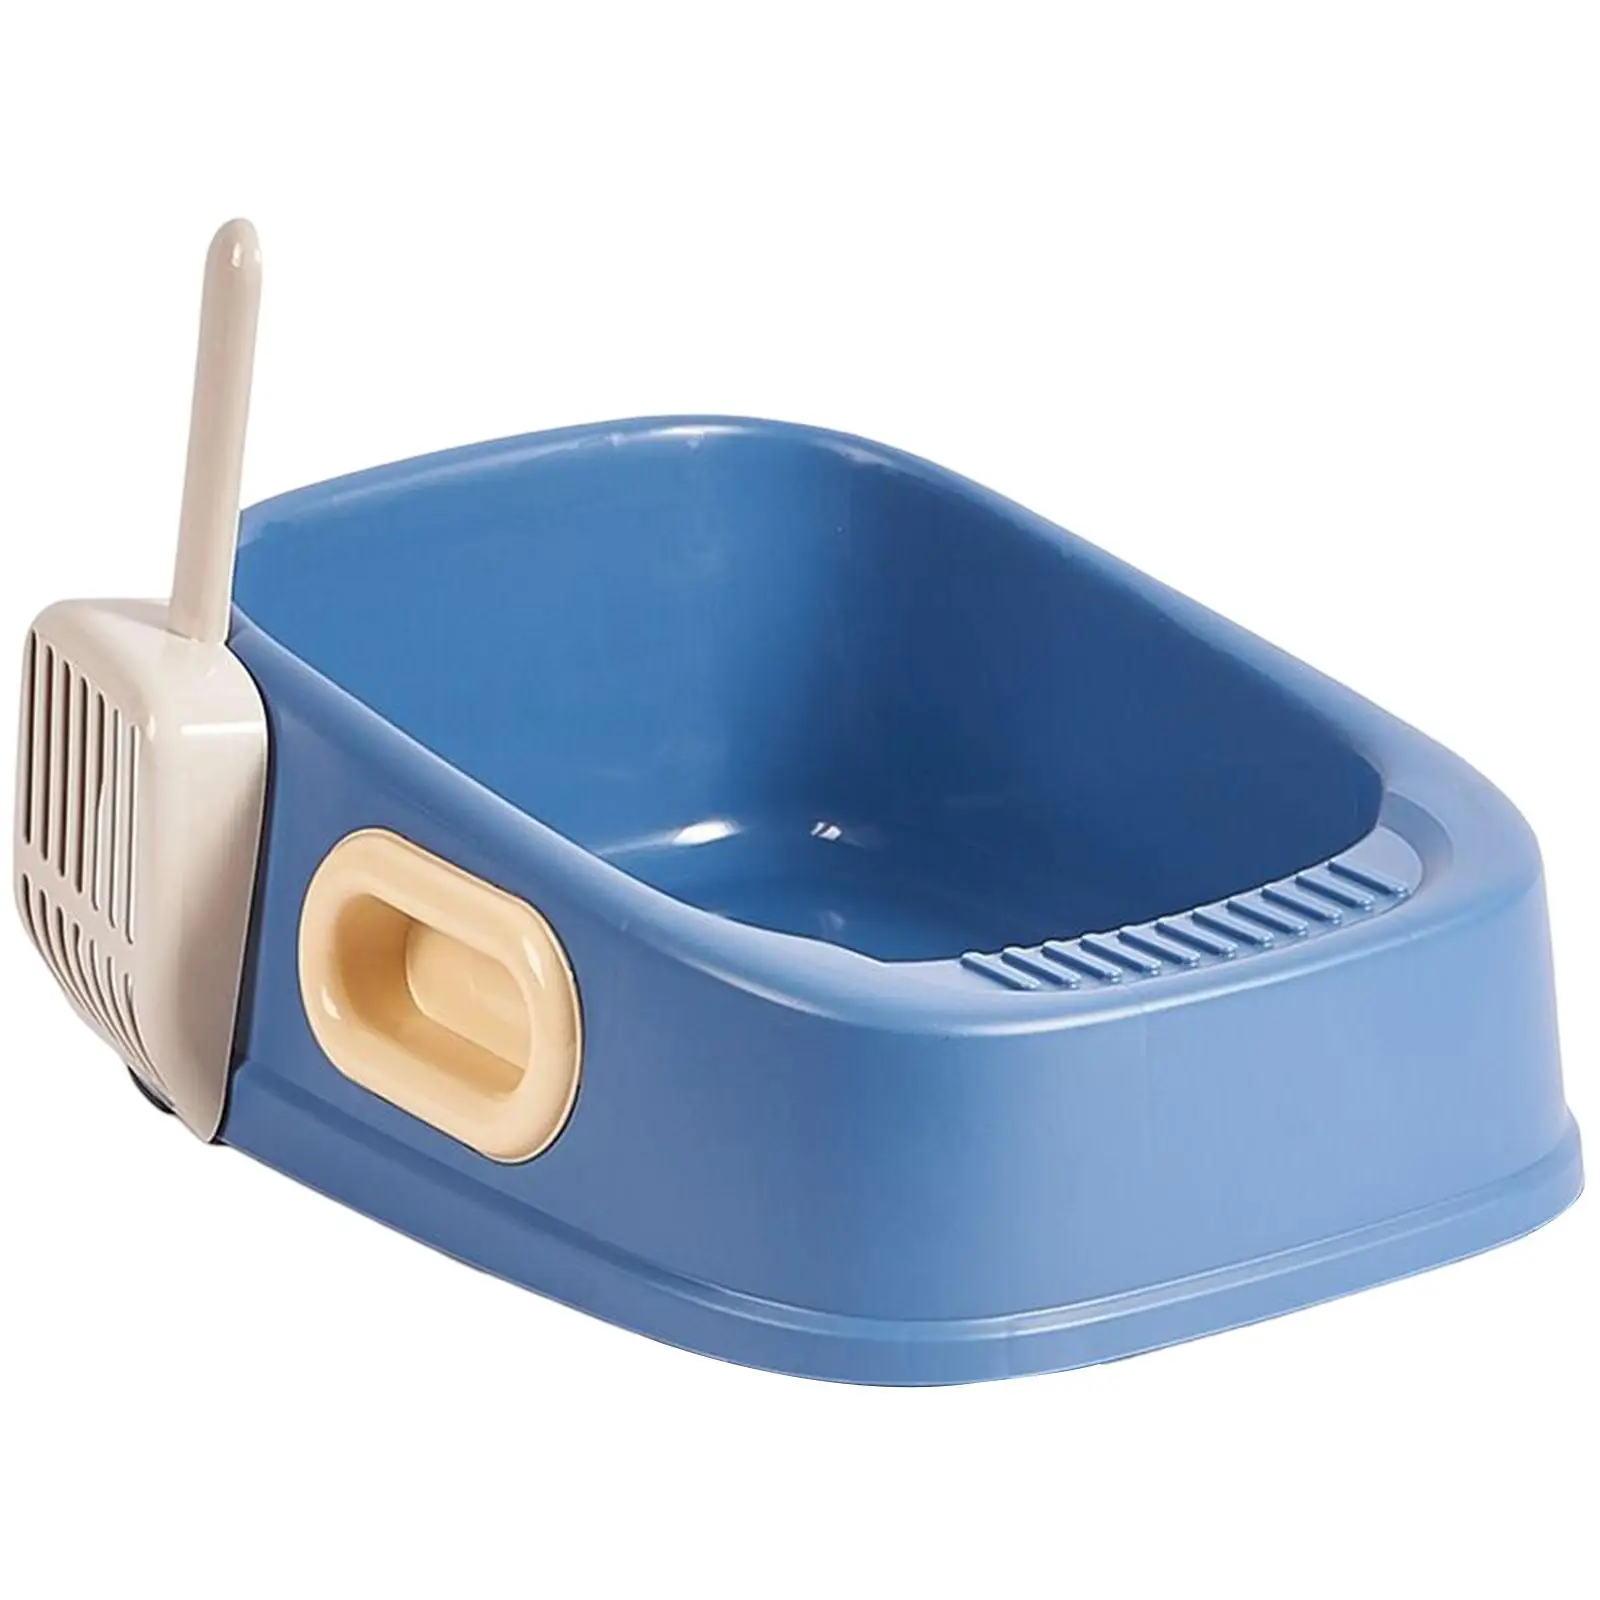 Pet Cat Litter Box Prevent Sand Leakage Sturdy with Spoon Pet Accessories Bedpan Kitty Litter Pan for All Kinds of Cat Litter